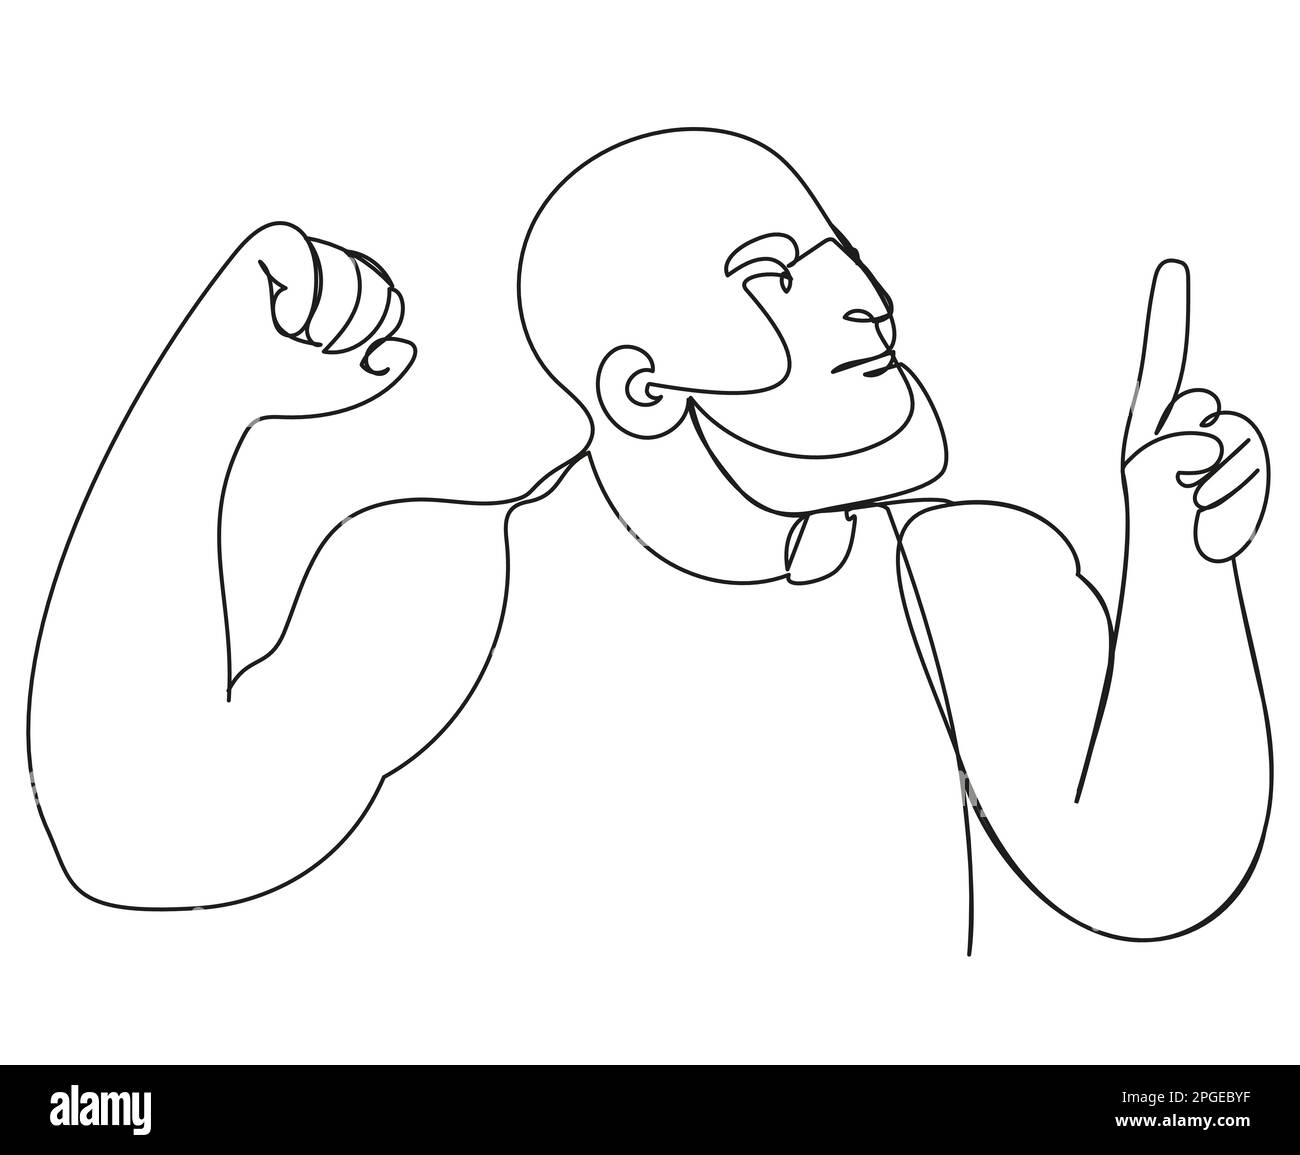 Bald man with a beard pointing his finger to the sky drawn with a continuous line on a white background. Strong man with muscles. Simple vector illust Stock Vector